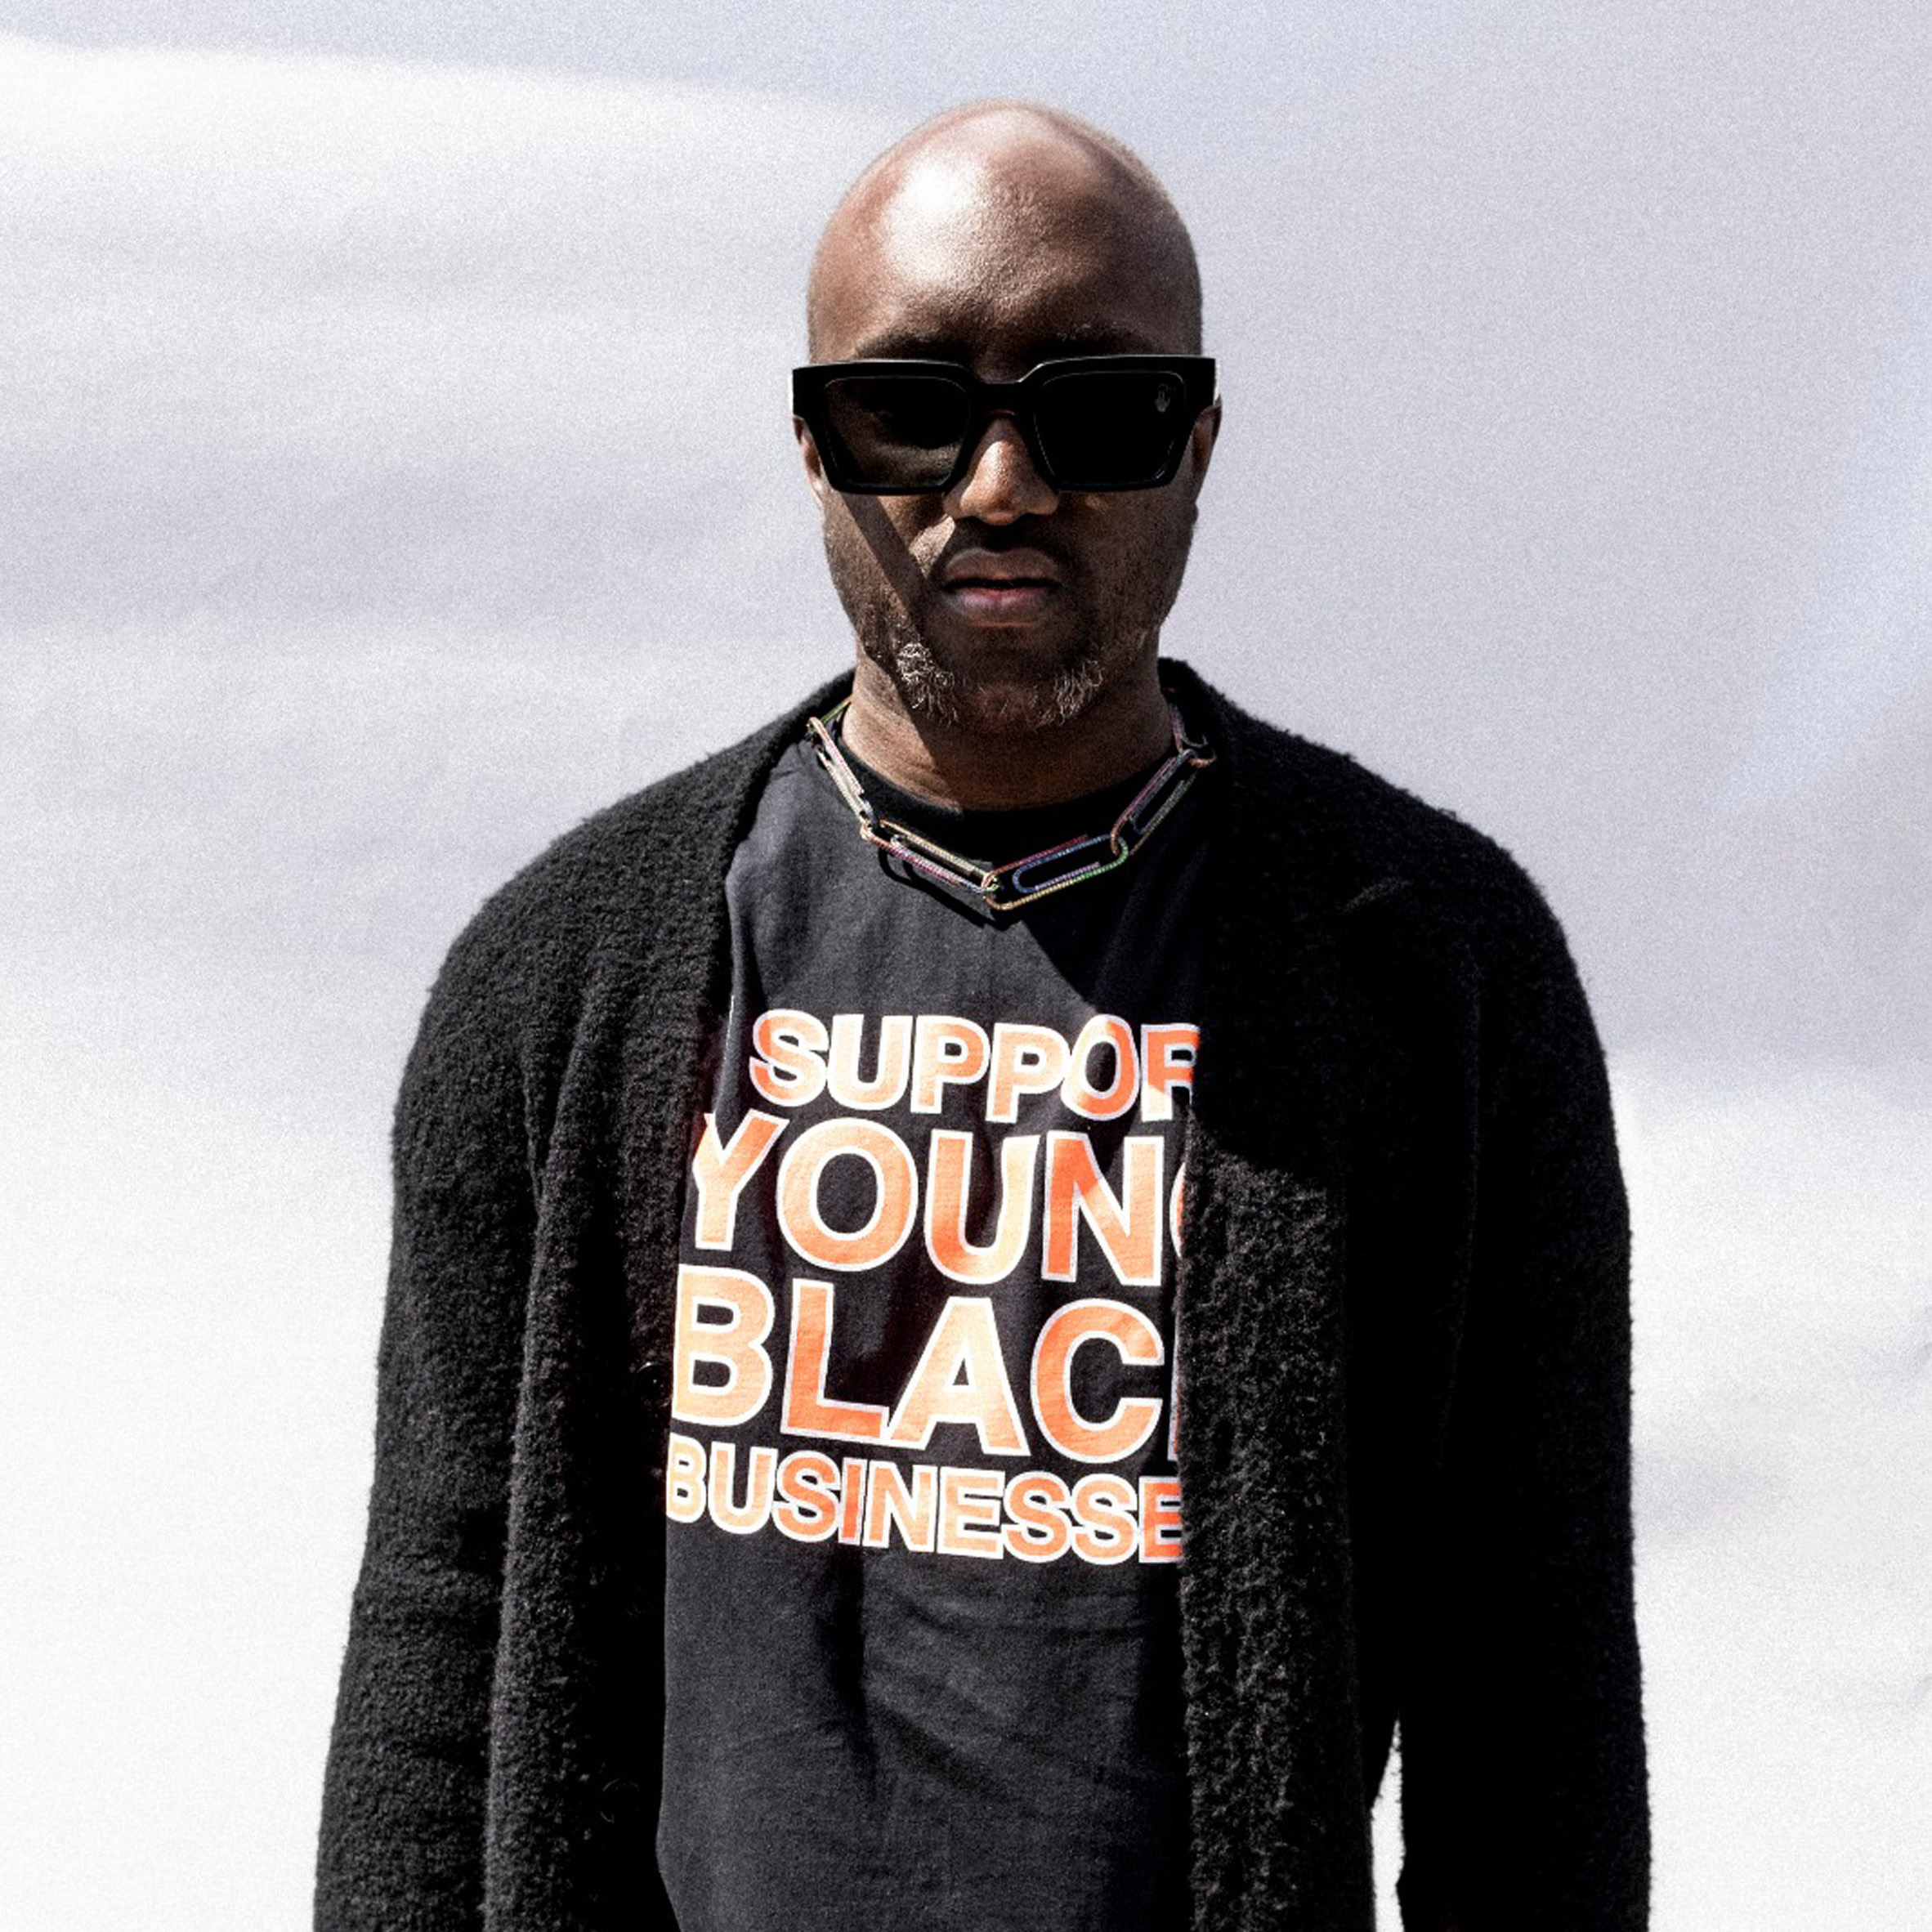 Virgil Abloh Announces 5 Upcoming Design Projects at Columbia Talk